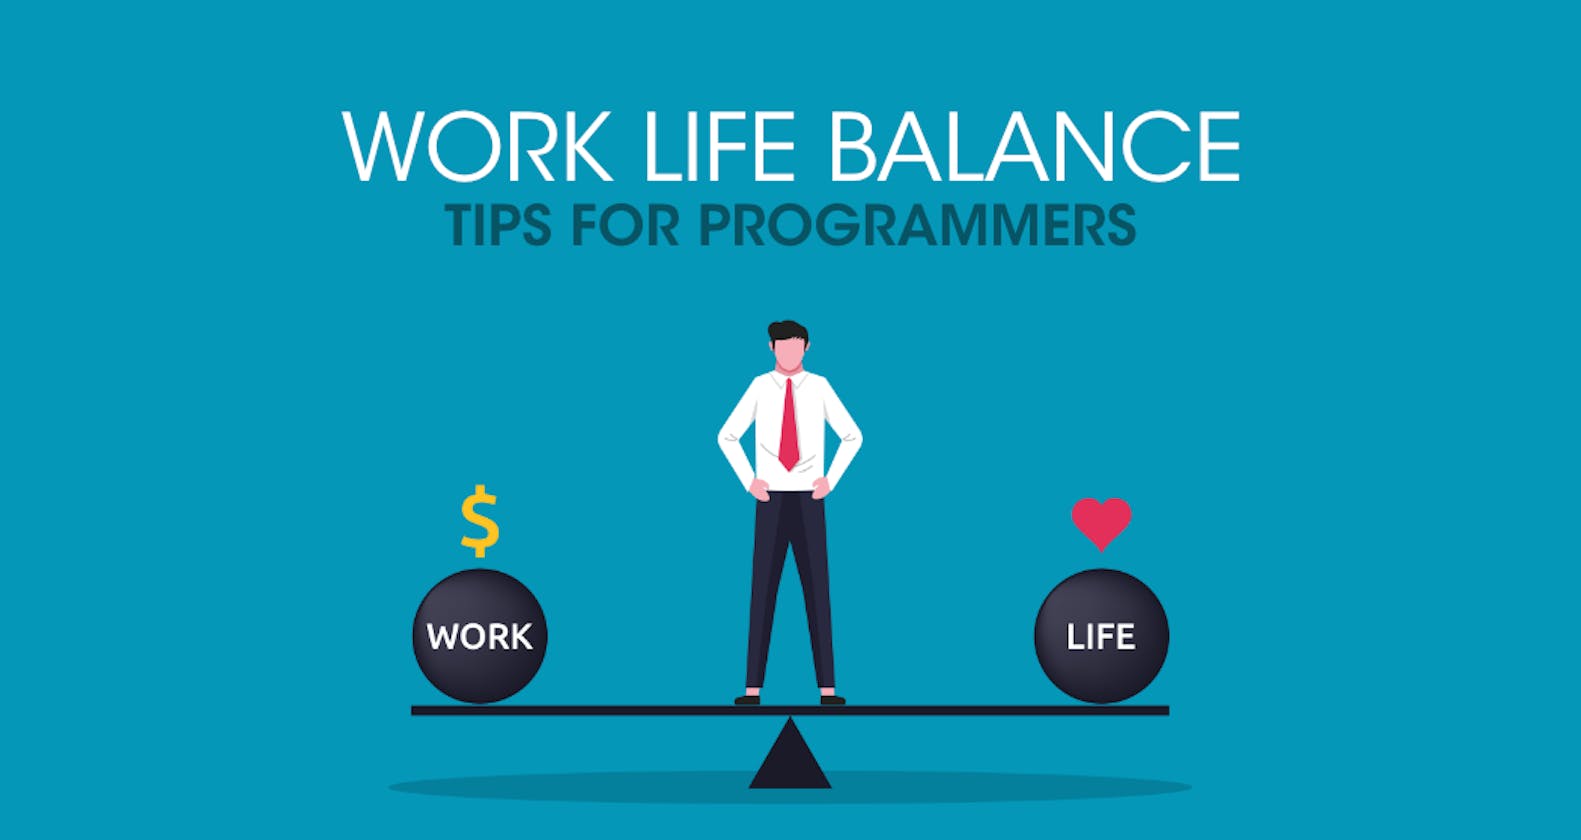 Beyond 9 to 5: How Software Developers Can Achieve Work-Life Balance